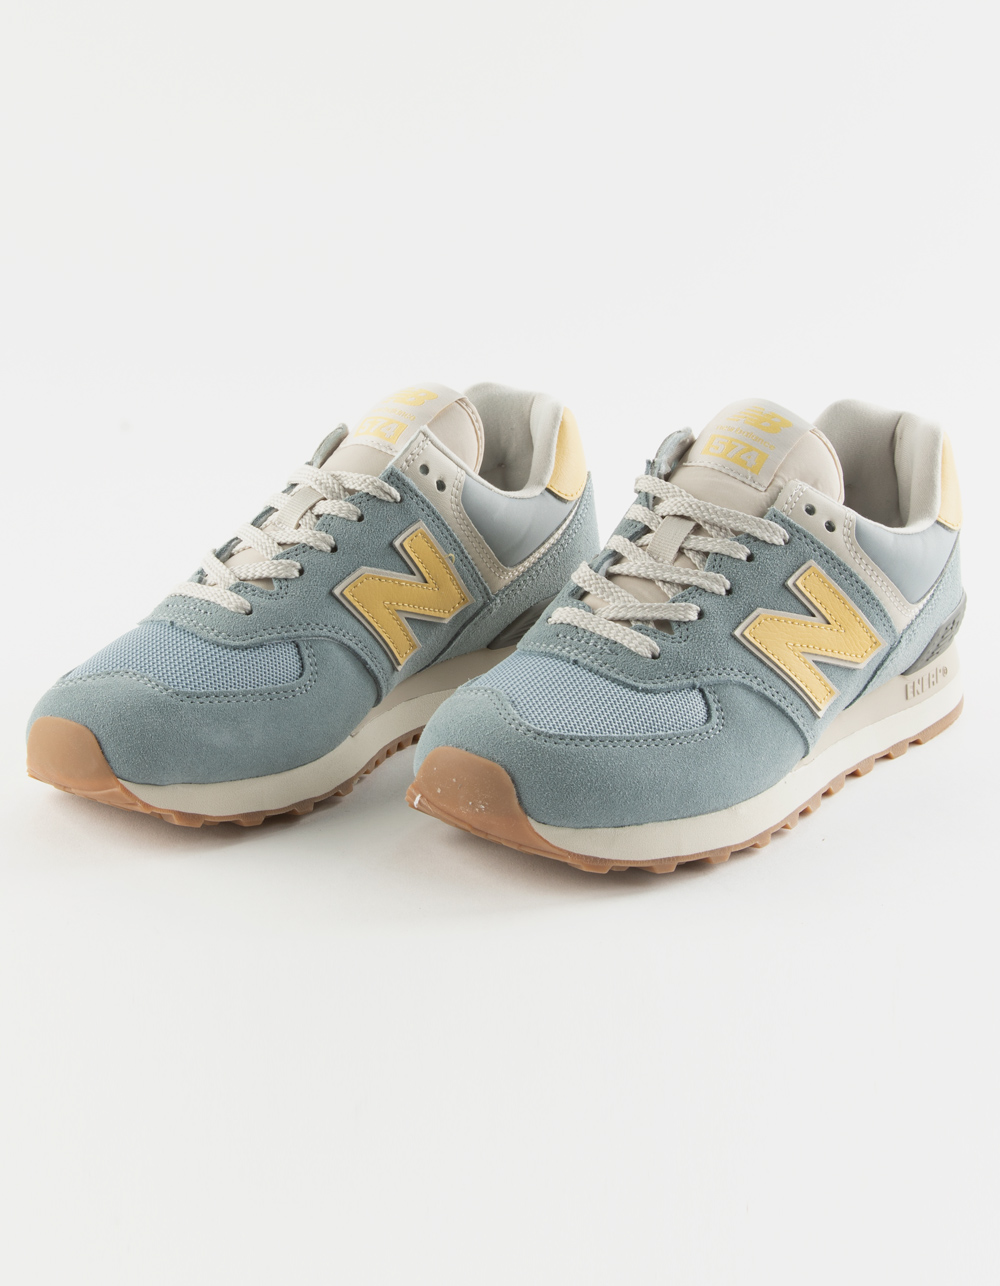 Pacer Leia intimidad NEW BALANCE 574 Womens Shoes - BABY BLUE | Tillys